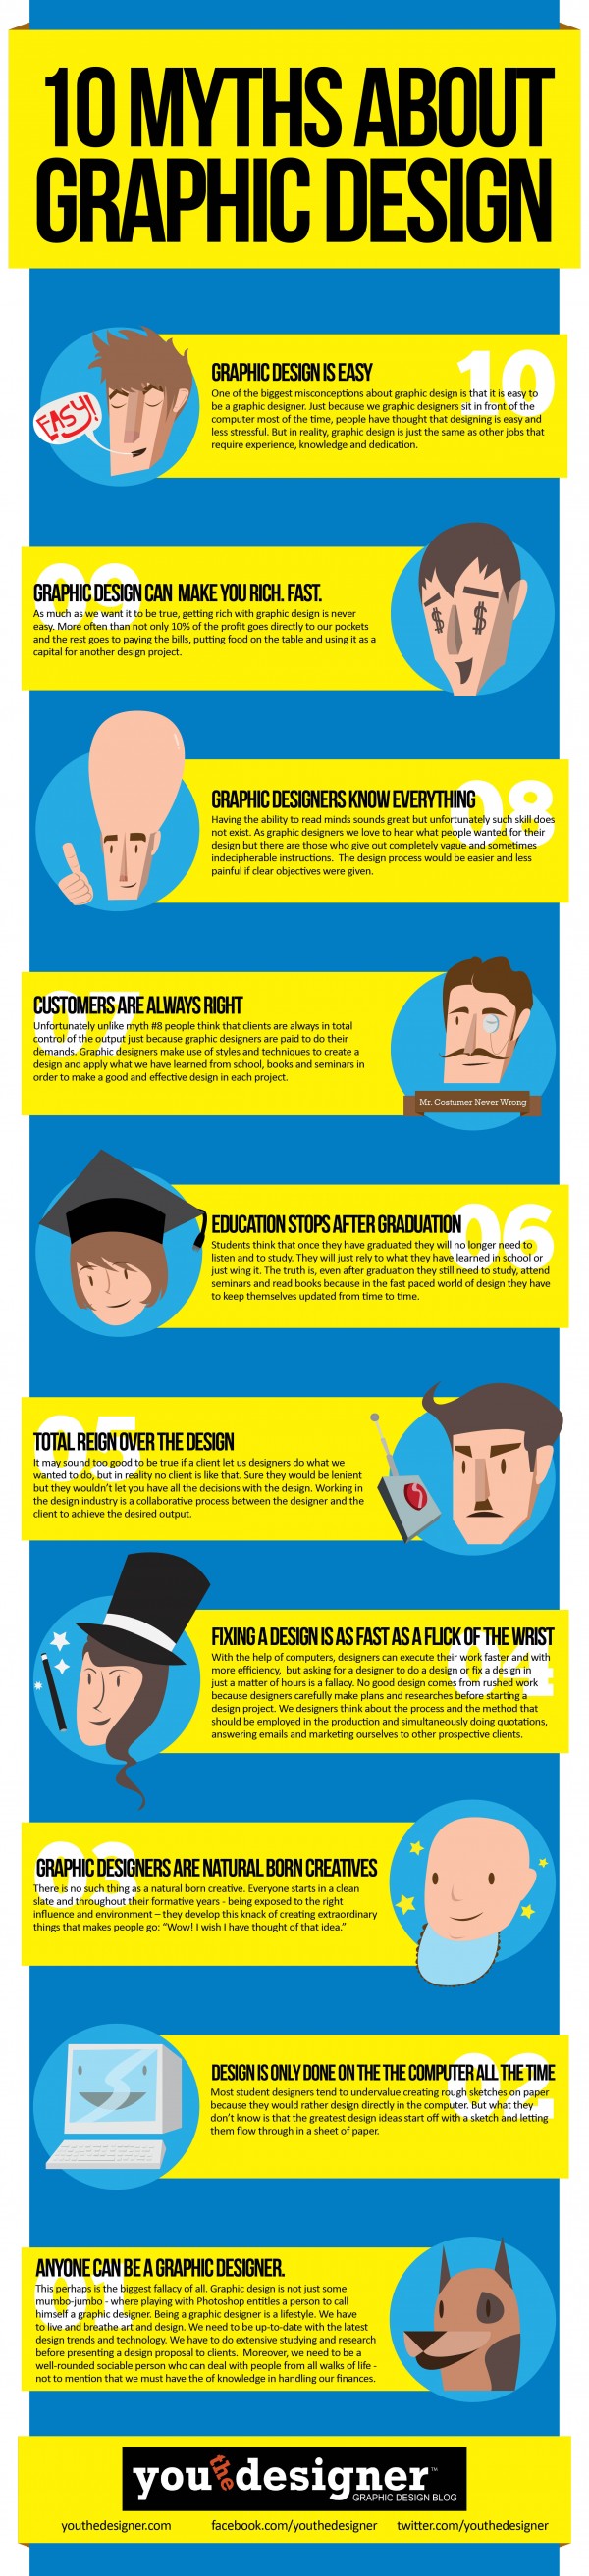 10 Common Myths of Graphic Design